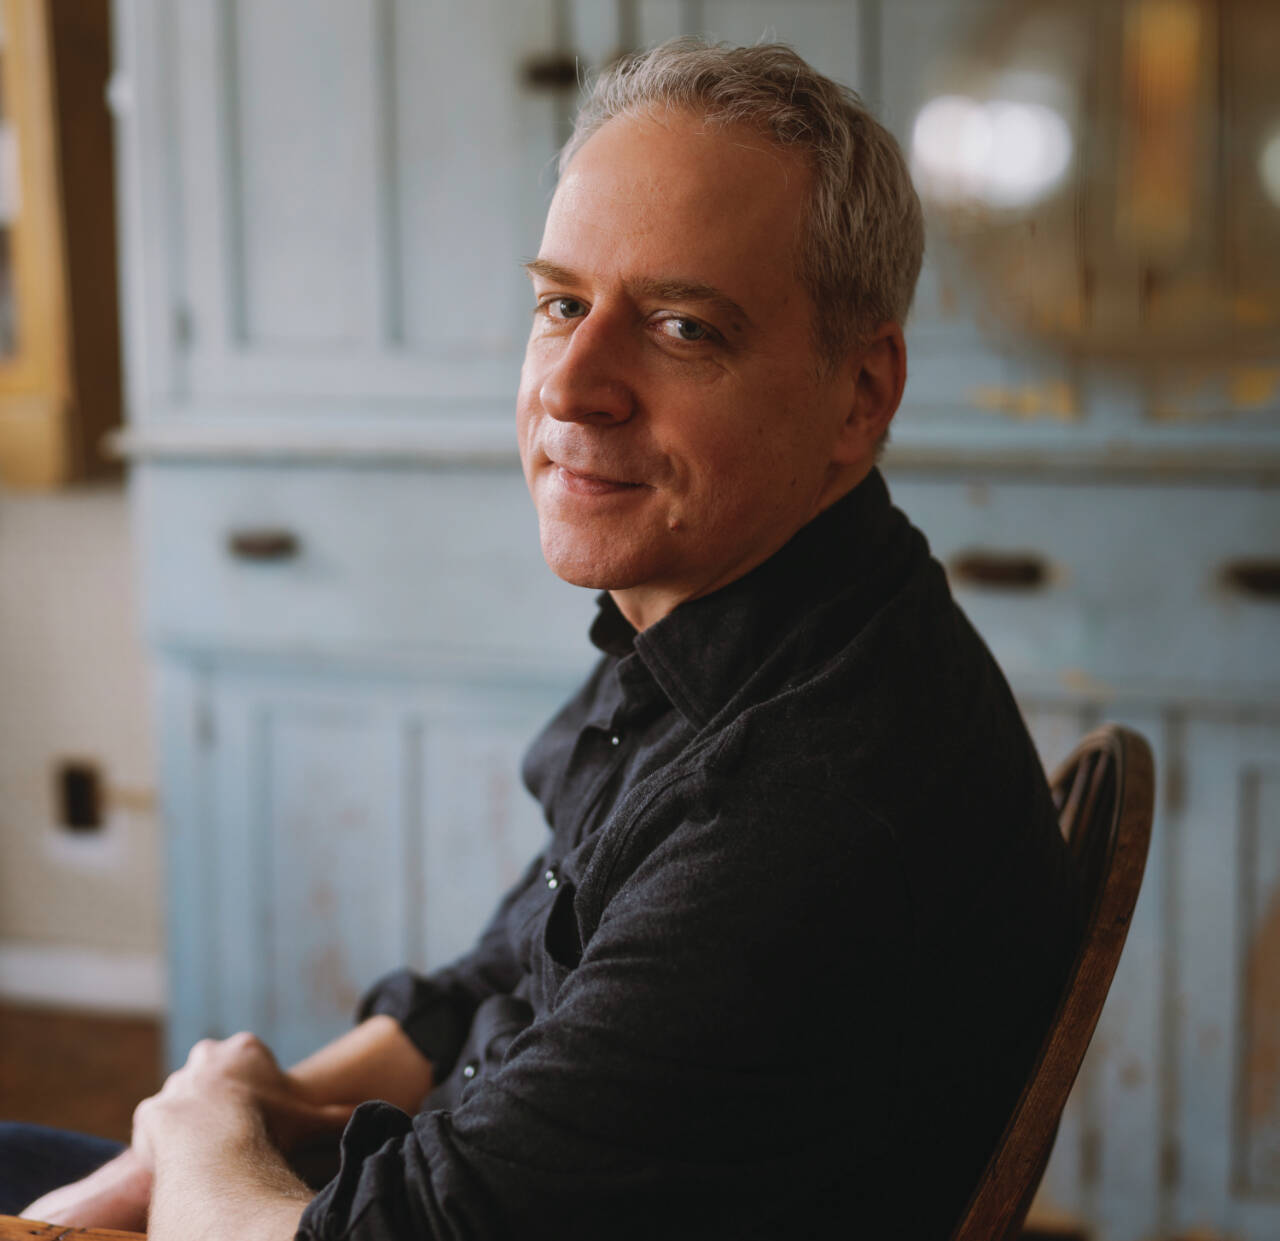 Pianist and best-selling author Jeremy Denk will appear at this summer’s Music on the Strait festival. (Photo by Josh Goleman)